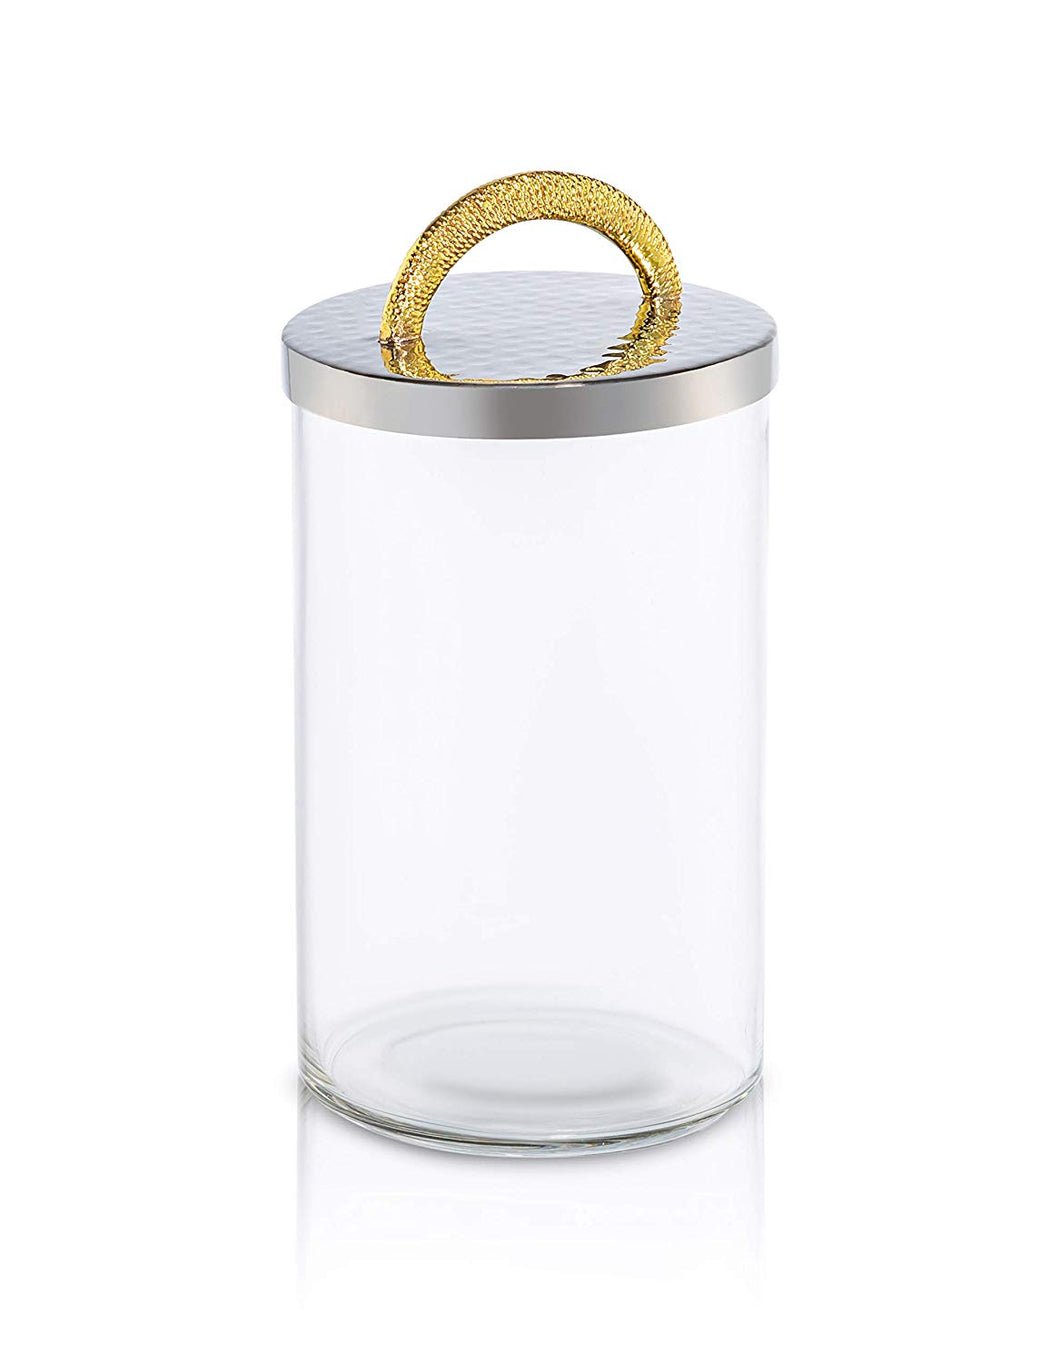 Glass Cookie/Candy Canister with Stainless Steel Lid- Silver and Gold (8